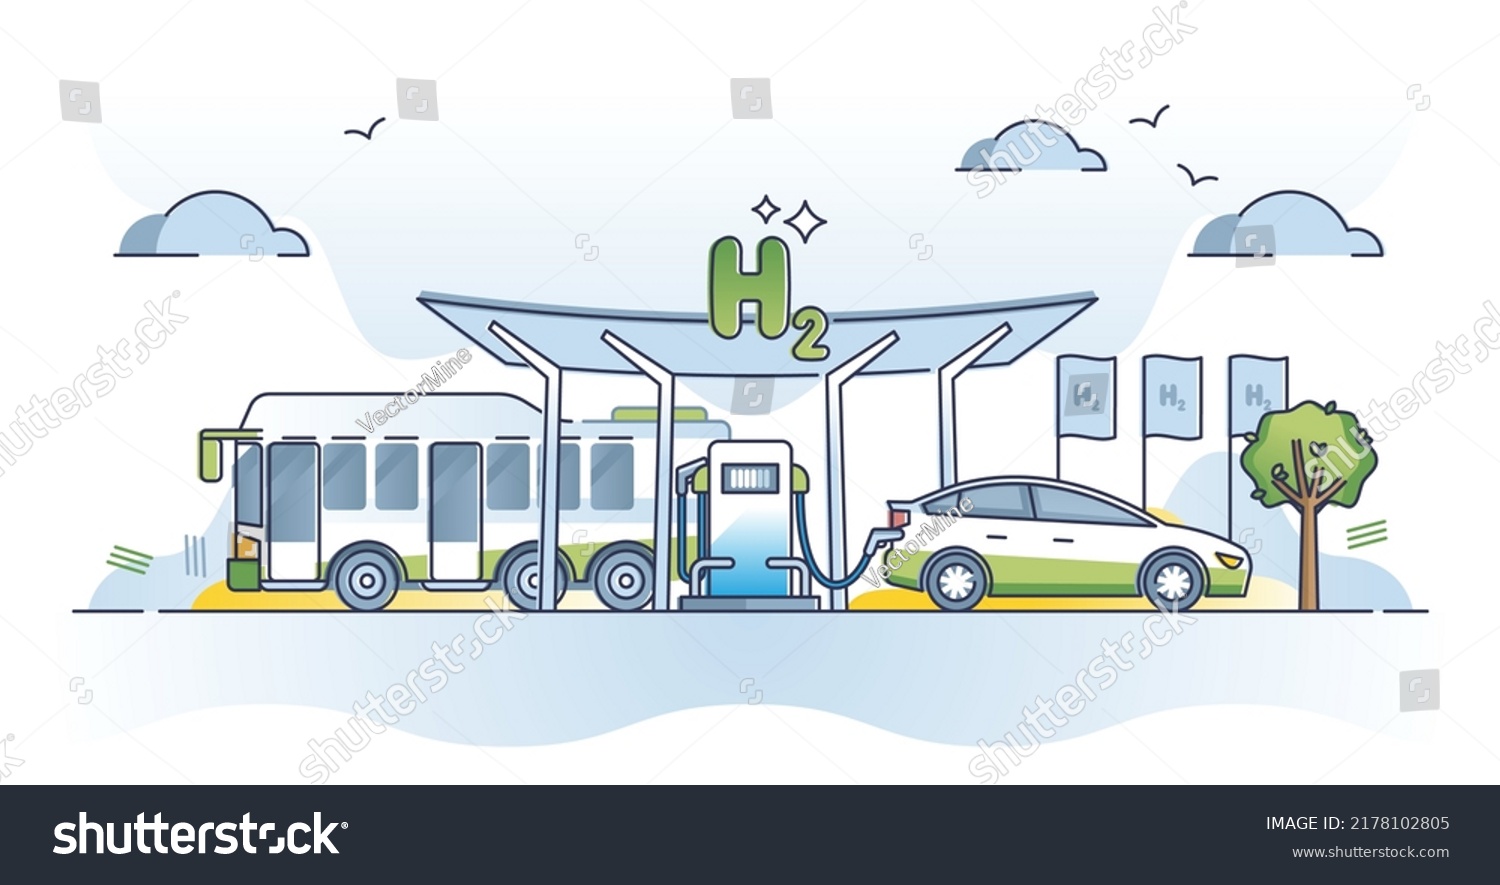 SVG of Hydrogen gas station with H2 alternative source filling nozzles outline concept. Environmental friendly and ecological car battery cell charging vector illustration. CO2 free, futuristic building. svg